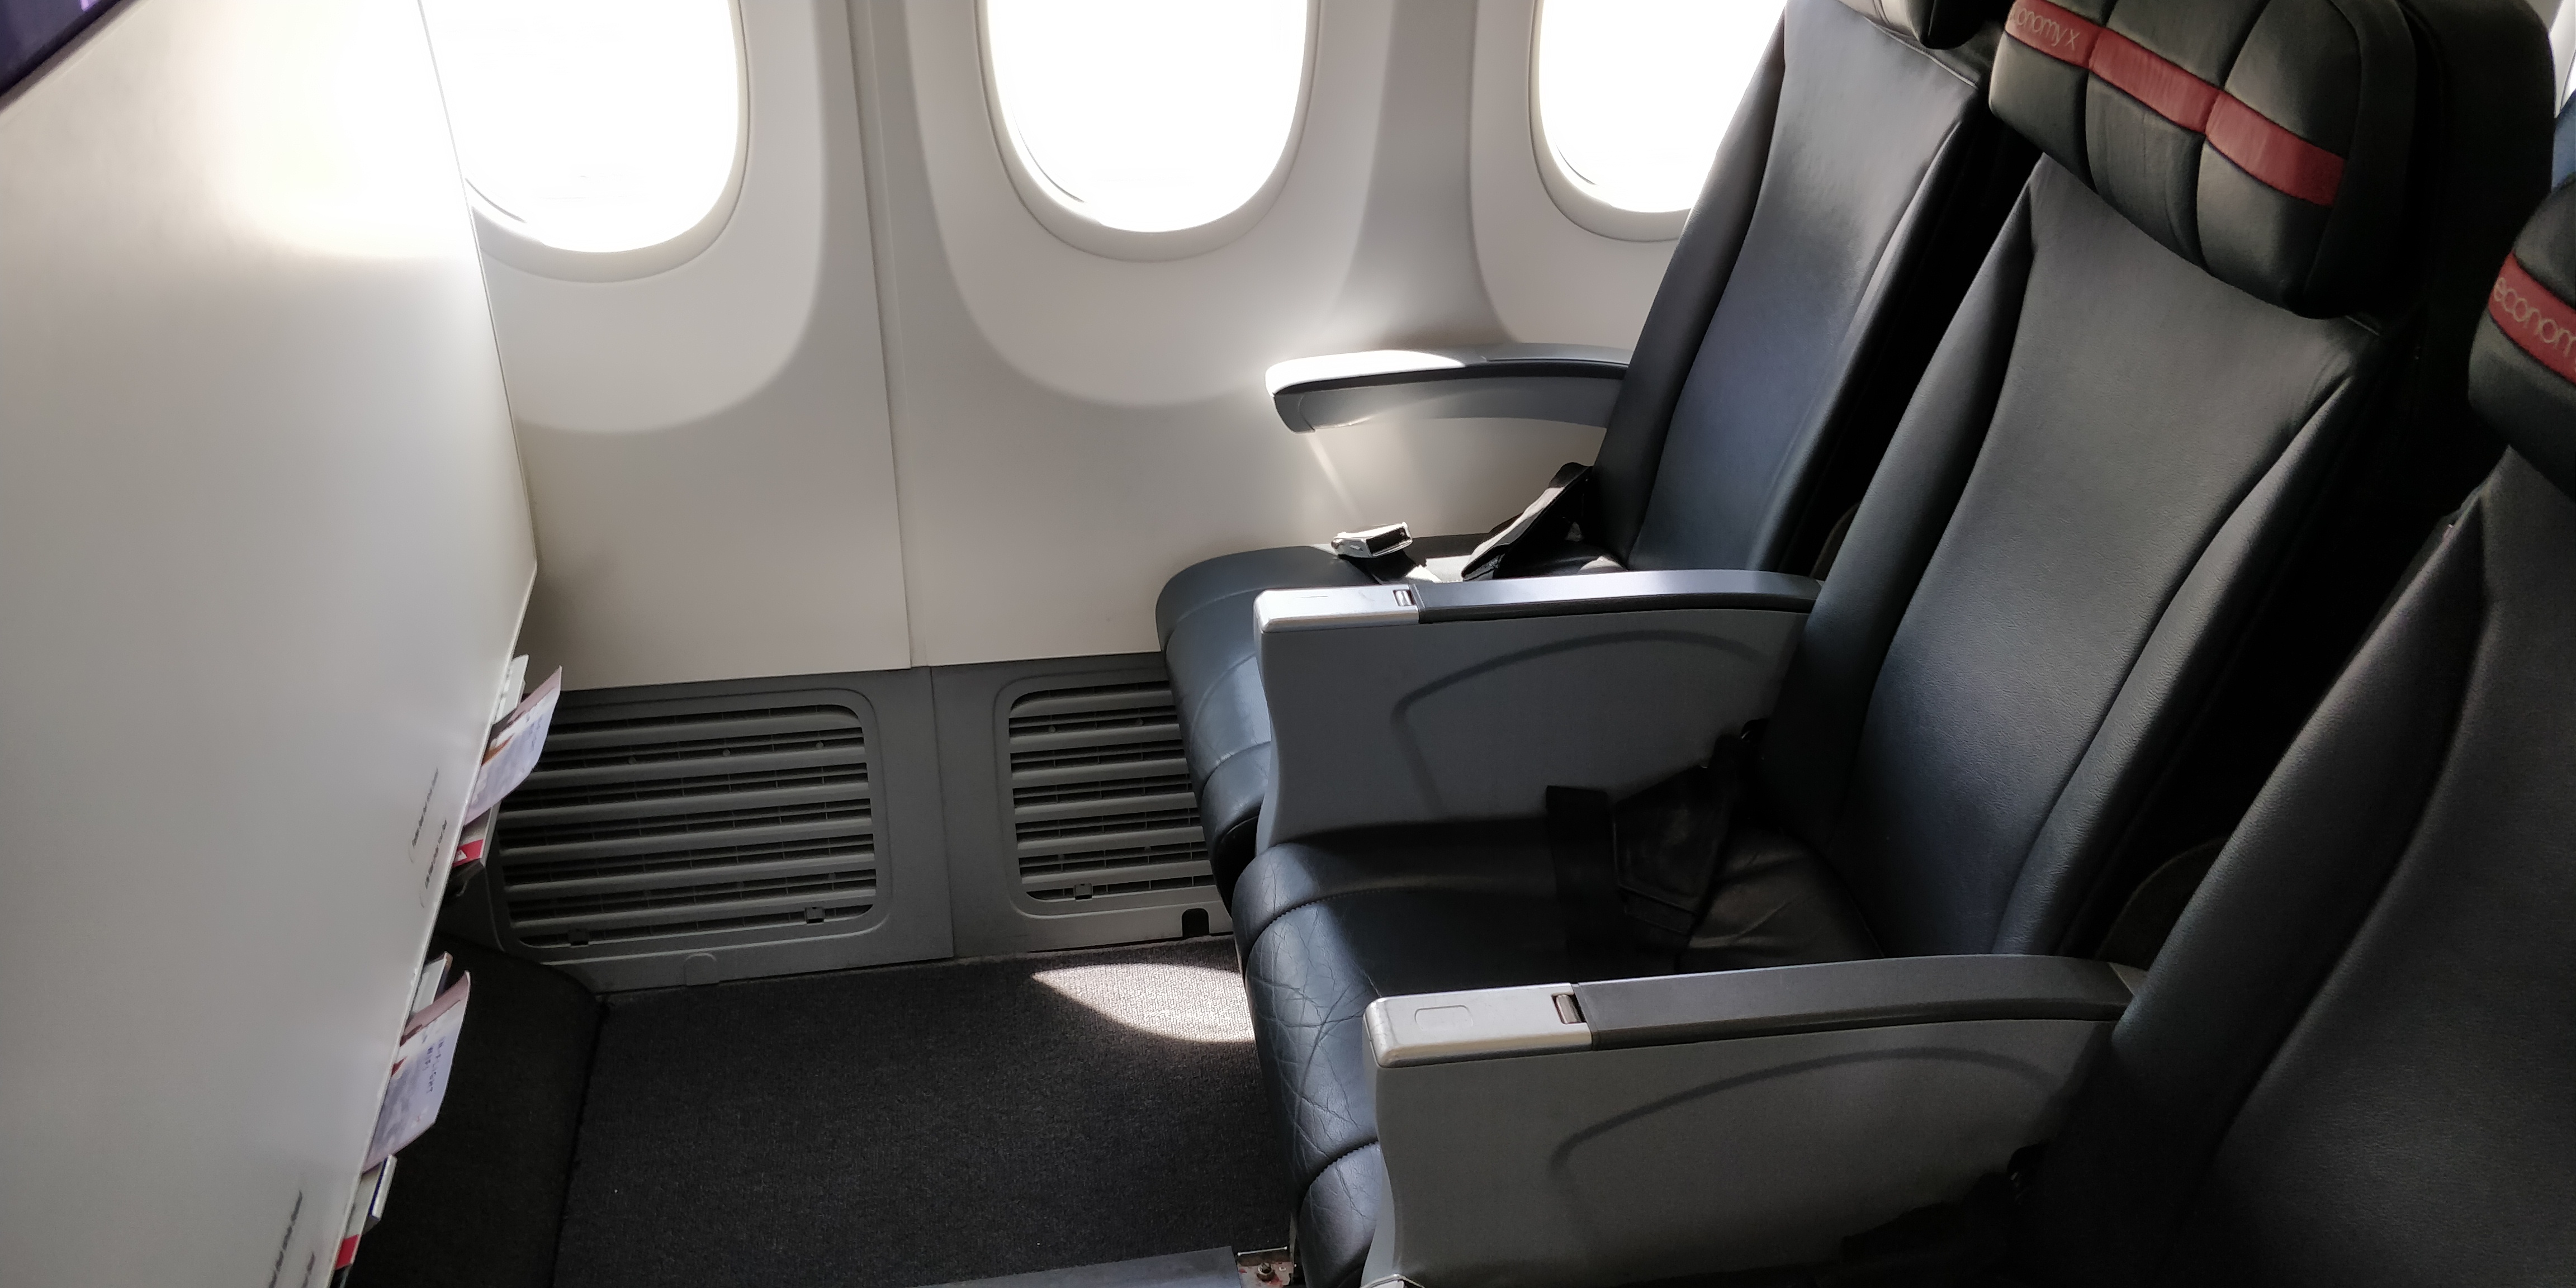 A PICTURE OF VIRGIN'S 737 ECONOMY X SEATS